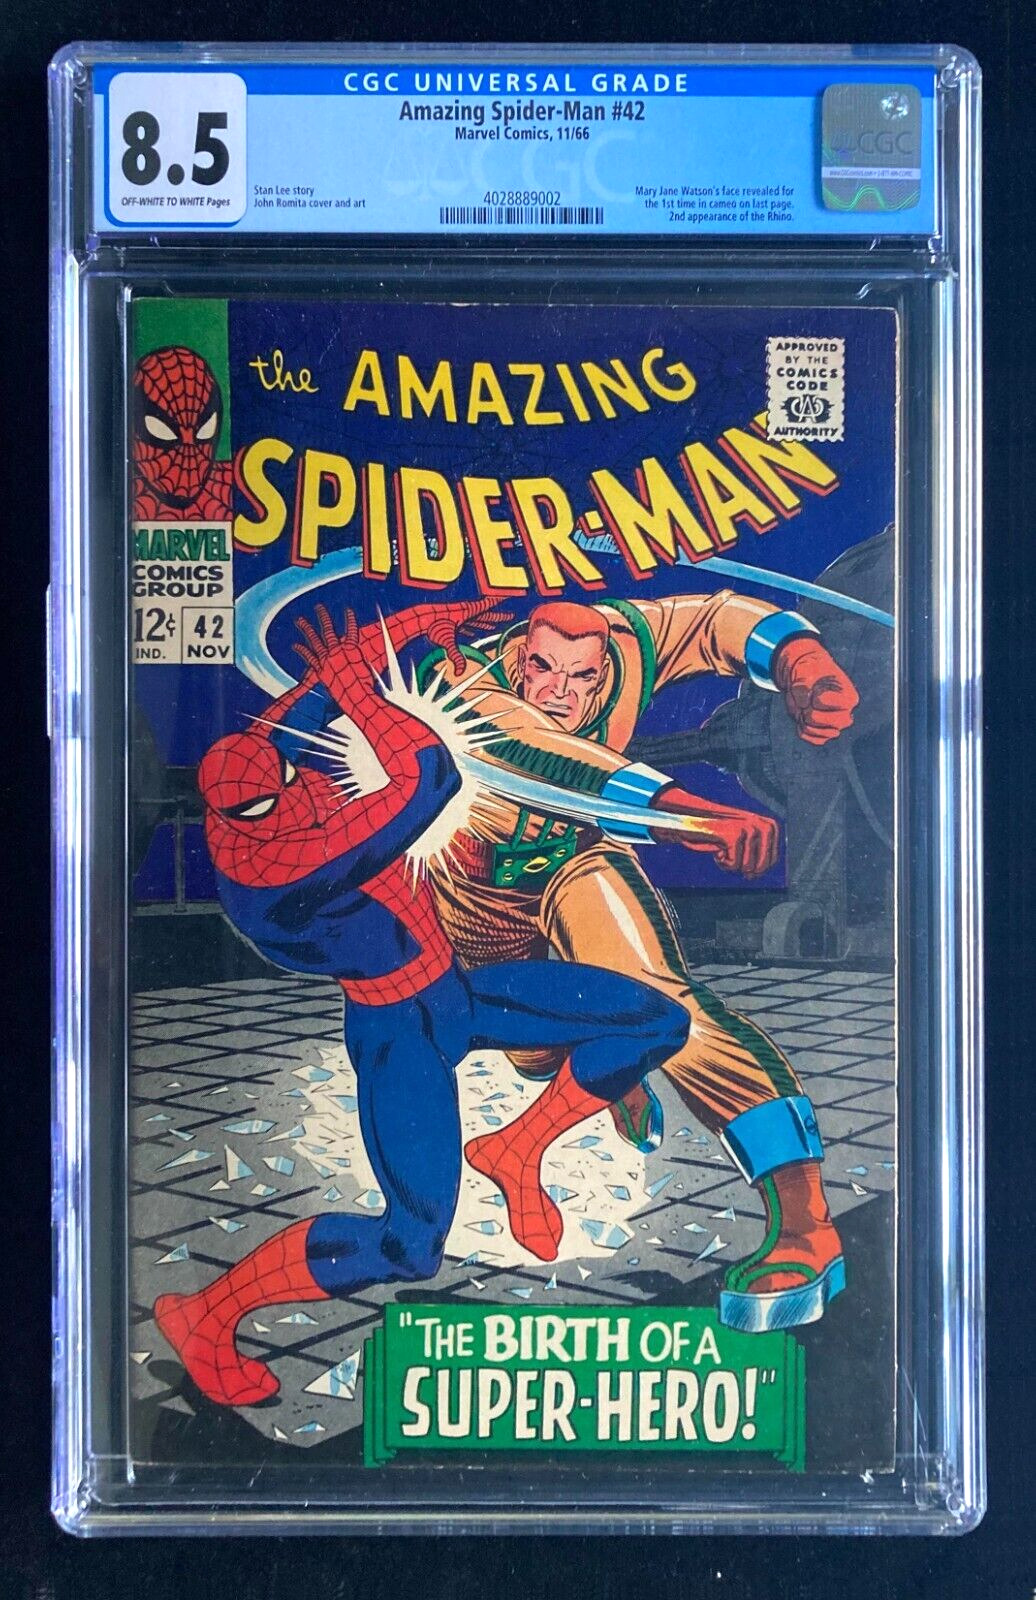 AMAZING SPIDER-MAN #42 1st Mary Jane Face Reveal (1966) CGC 8.5 (Brand New)